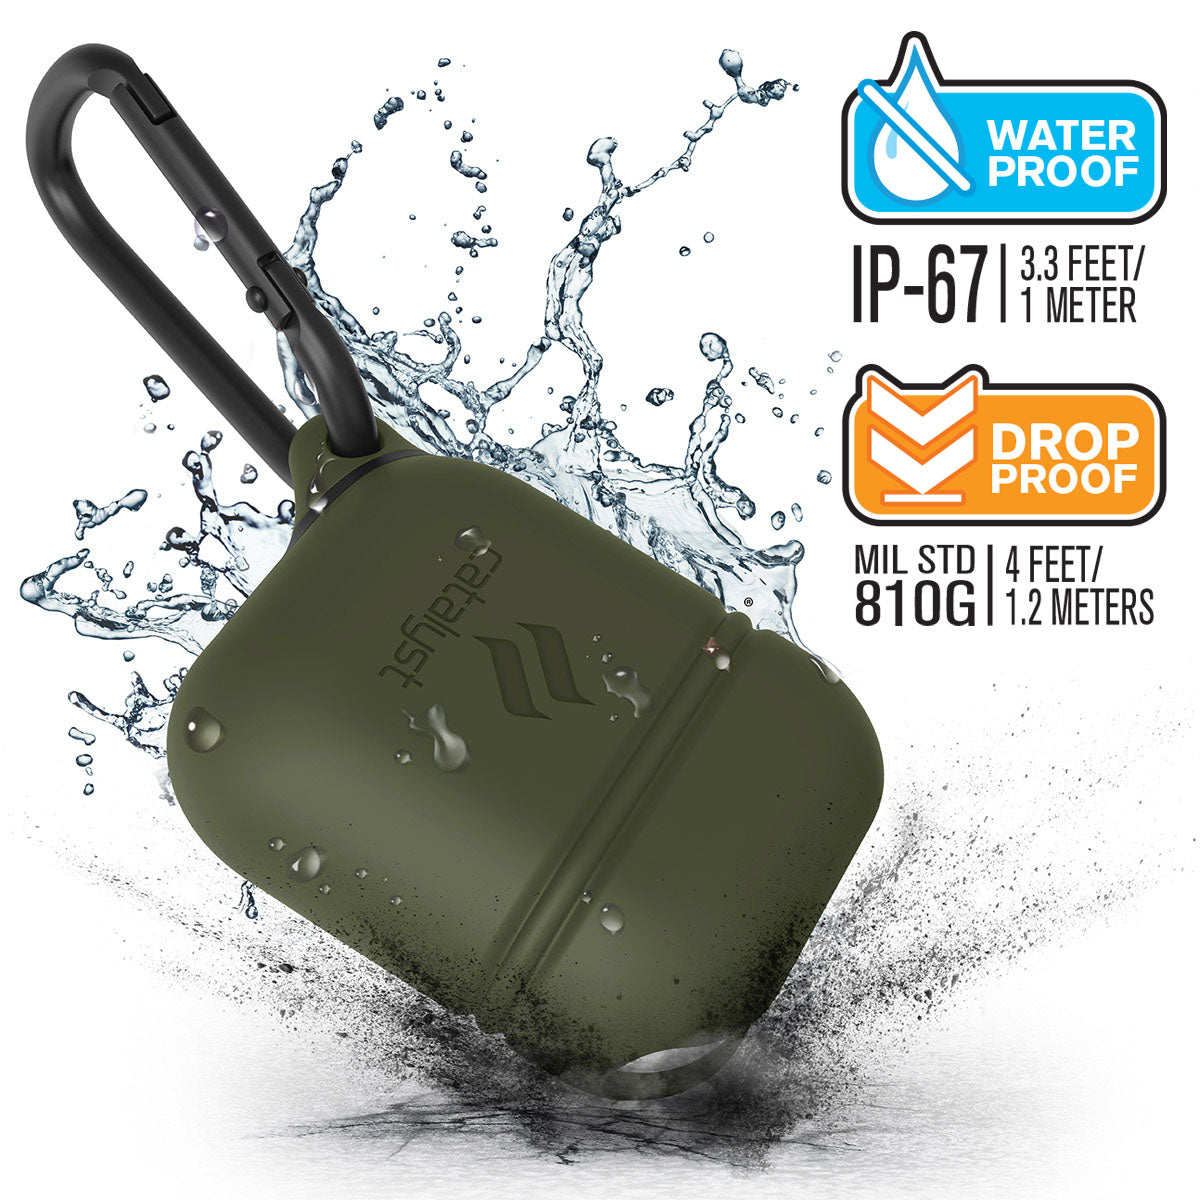 Catalyst airpods gen2/1 waterproof case + carabiner showing the case drop proof and water proof features with attached carabiner in army green text reads water proof IP-67 3.3 FEET/1 METER DROP PROOF MIL STD 810G 1.2 METERS